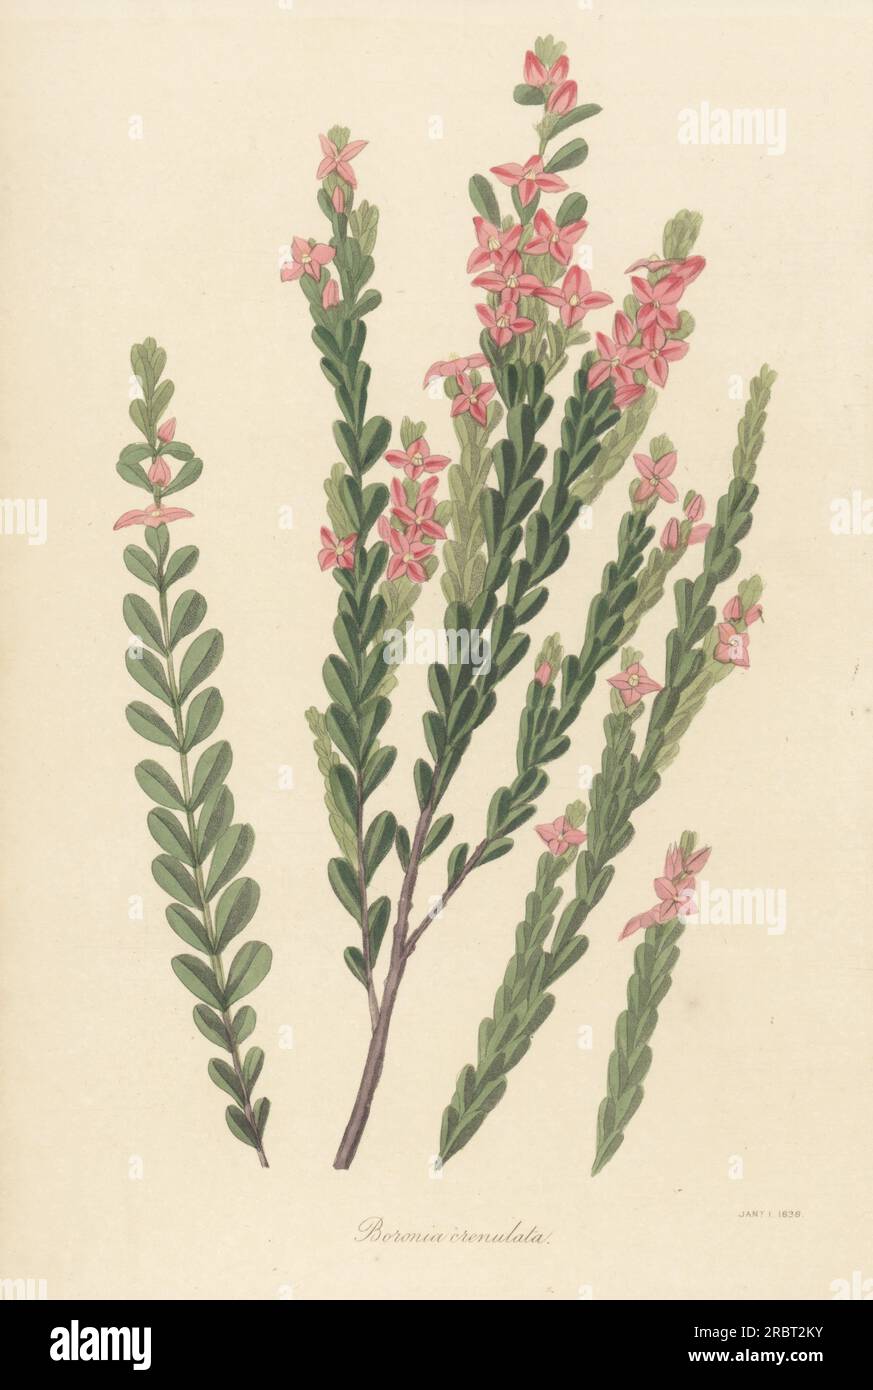 Aniseed boronia or crenulate-leaved boronia, Boronia crenulata. Native to Western Australia, found by Scottish botanist Archibald Menzies at King George's Sound, and described by English botanist James Edward Smith in 1807. Handcoloured engraving from Joseph Paxton’s Magazine of Botany, and Register of Flowering Plants, Volume 4, Orr and Smith, London, 1837. Stock Photo